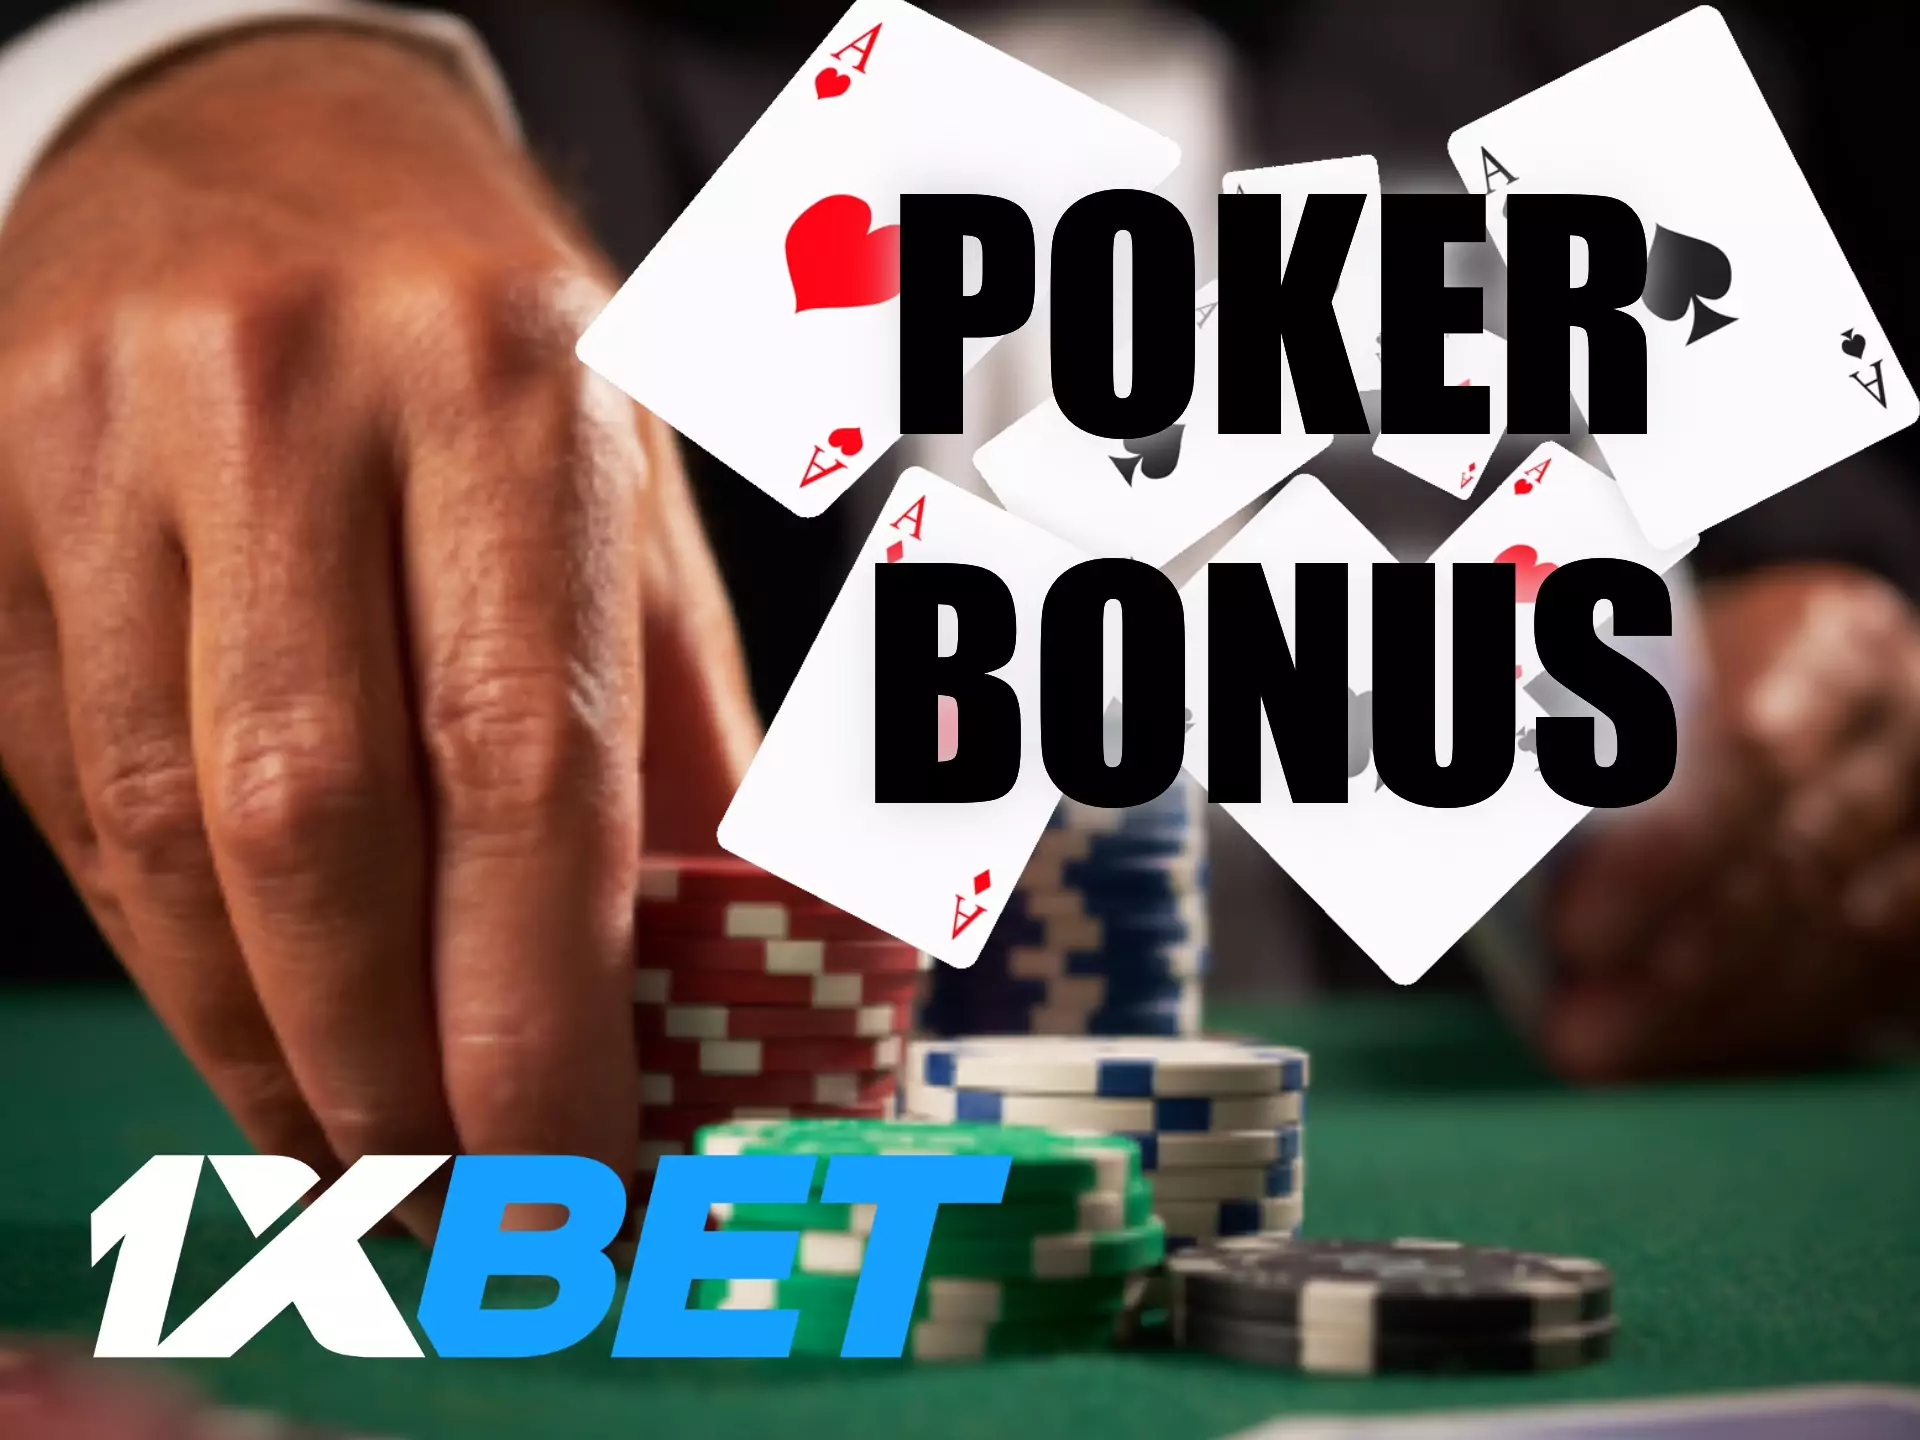 Play poker with a welcoe bonus from 1xbet.